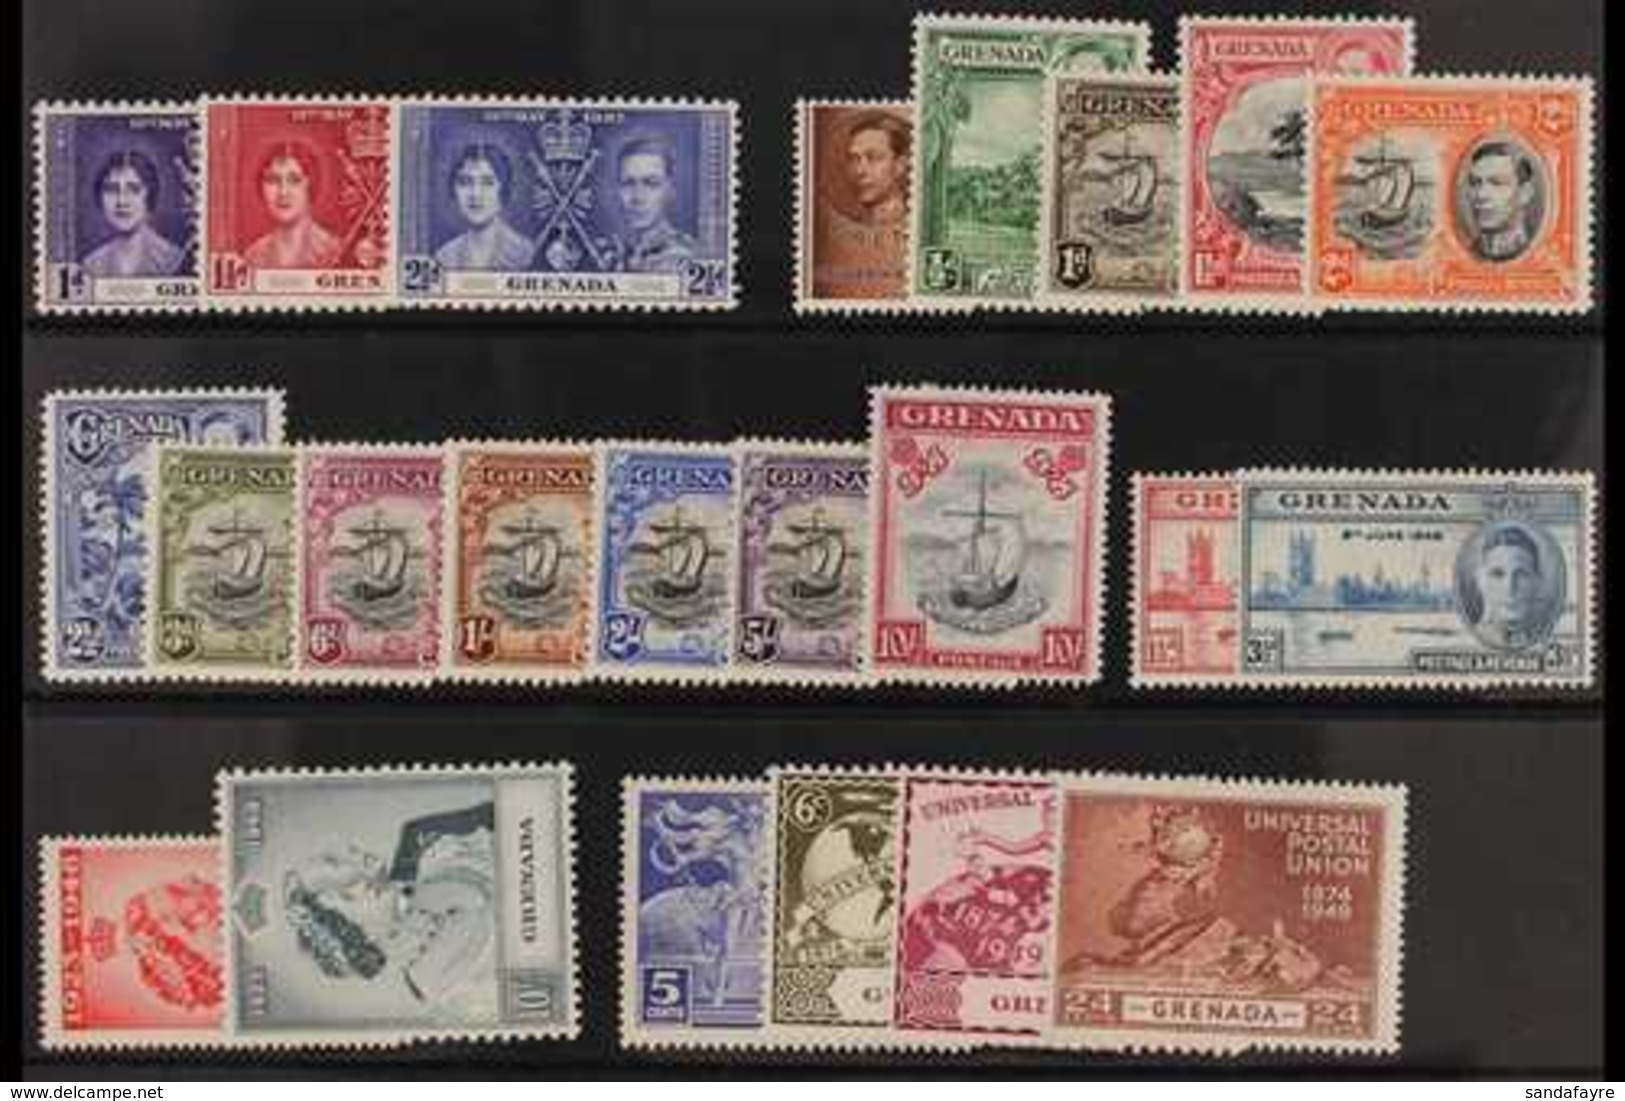 1937-1951 COMPLETE VERY FINE MINT COLLECTION  On Stock Cards, All Different, Includes 1938-50 Set, 1948 Wedding Set, 195 - Grenada (...-1974)